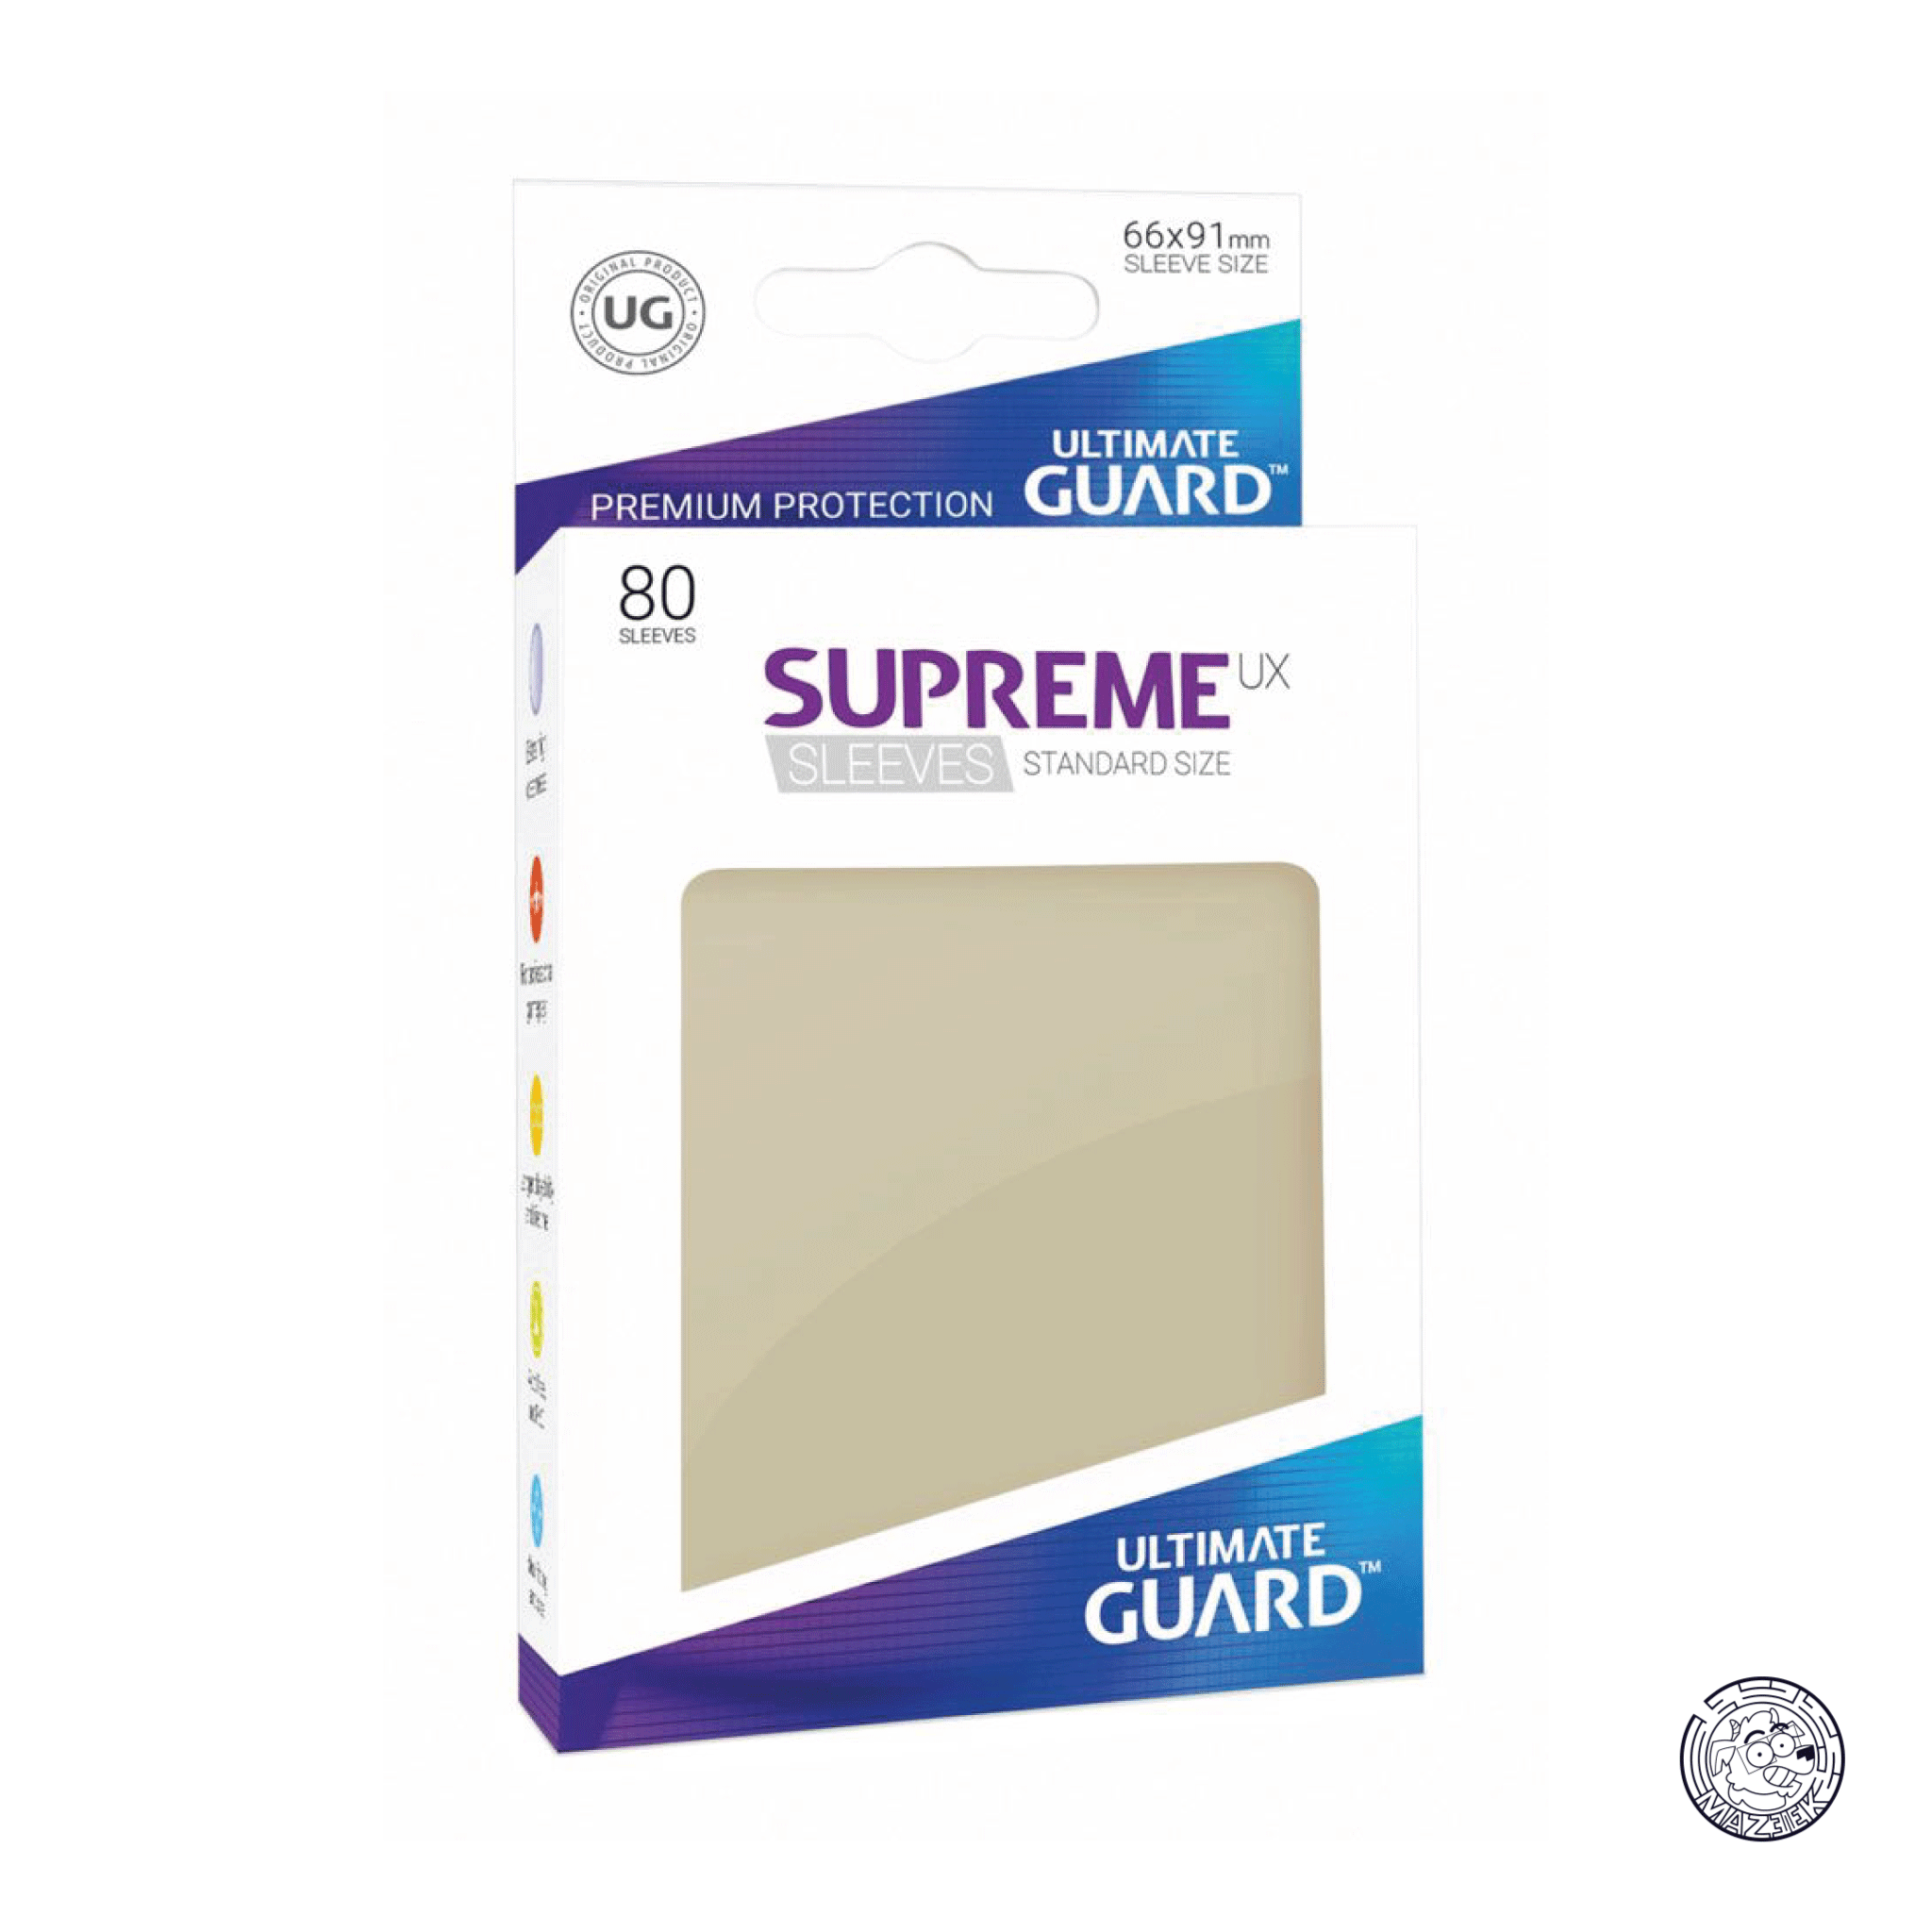 Ultimate Guard - 80 Sleeves Supreme: Standard Size 66x91 mm (Sand)